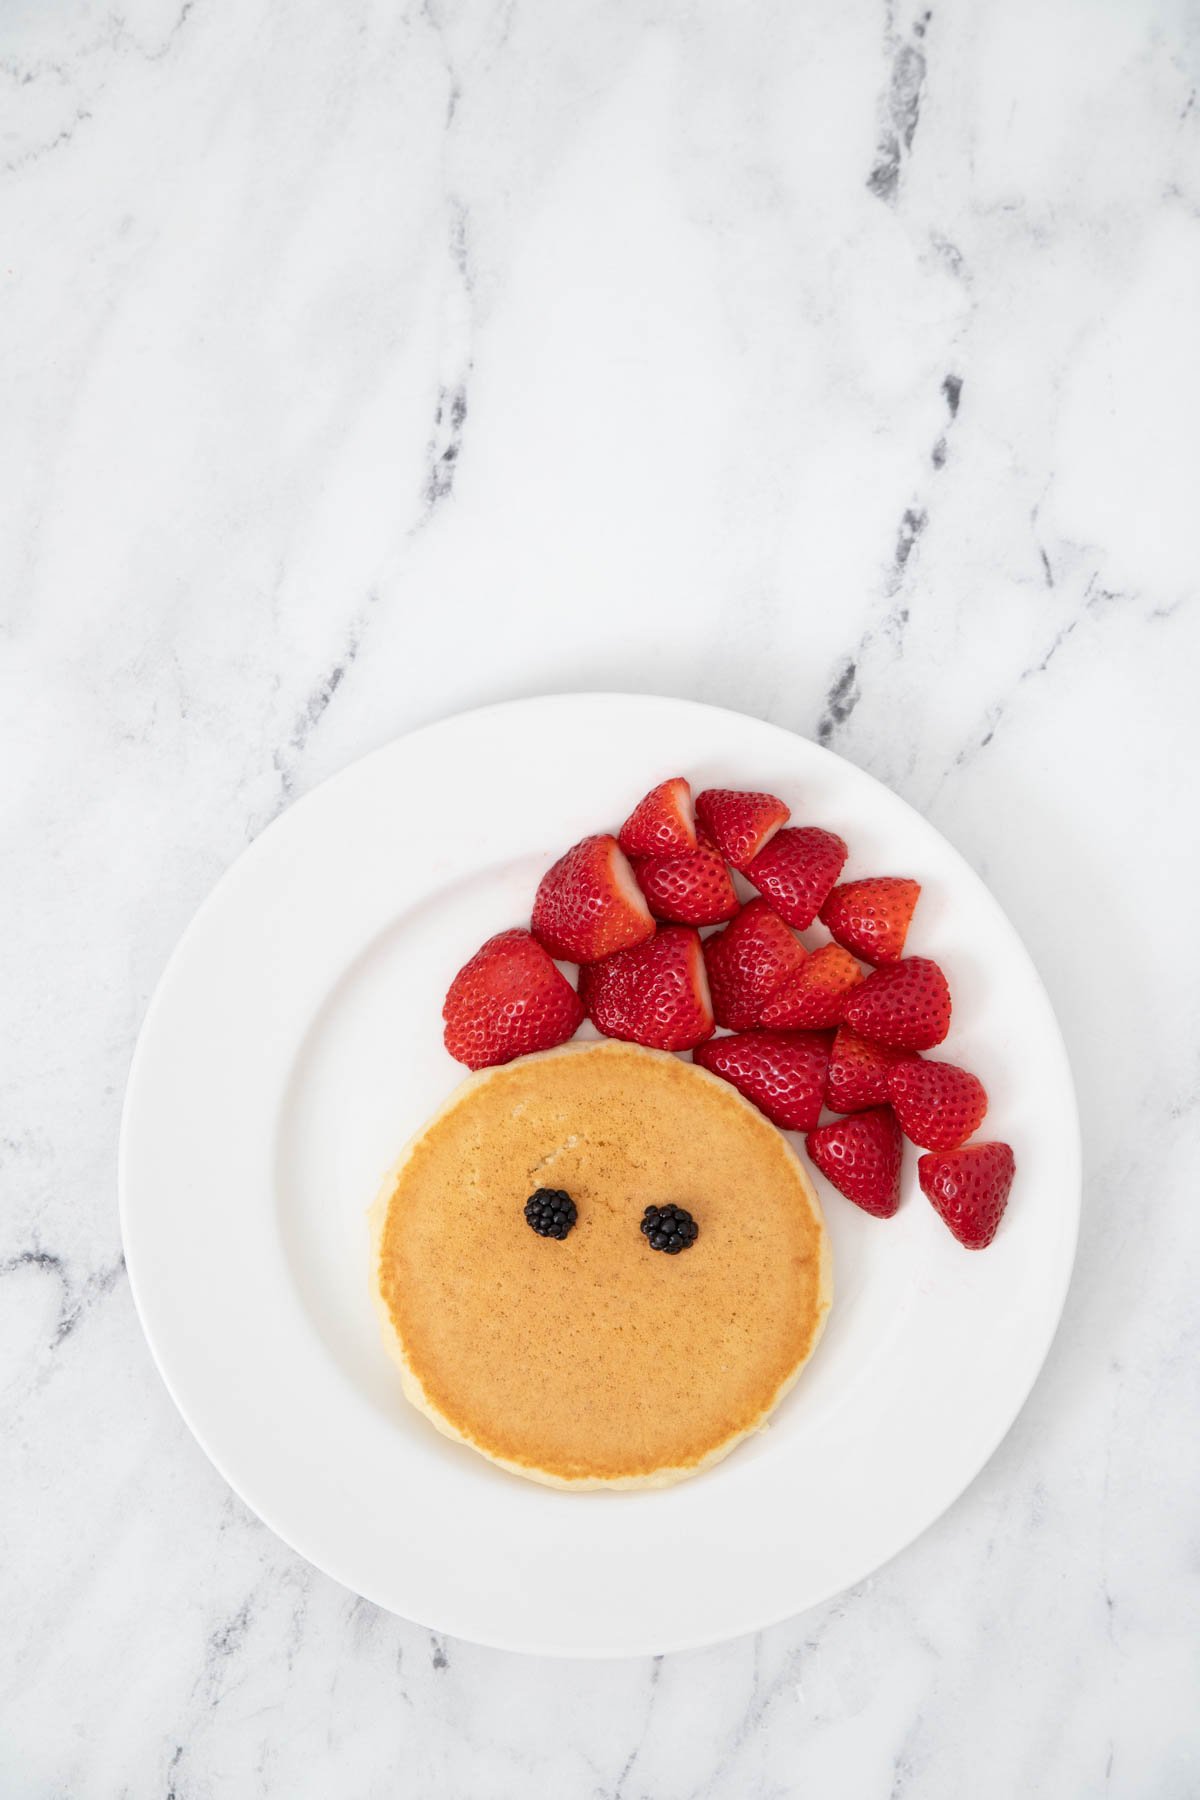 A plate of pancakes with strawberries and a face on it.